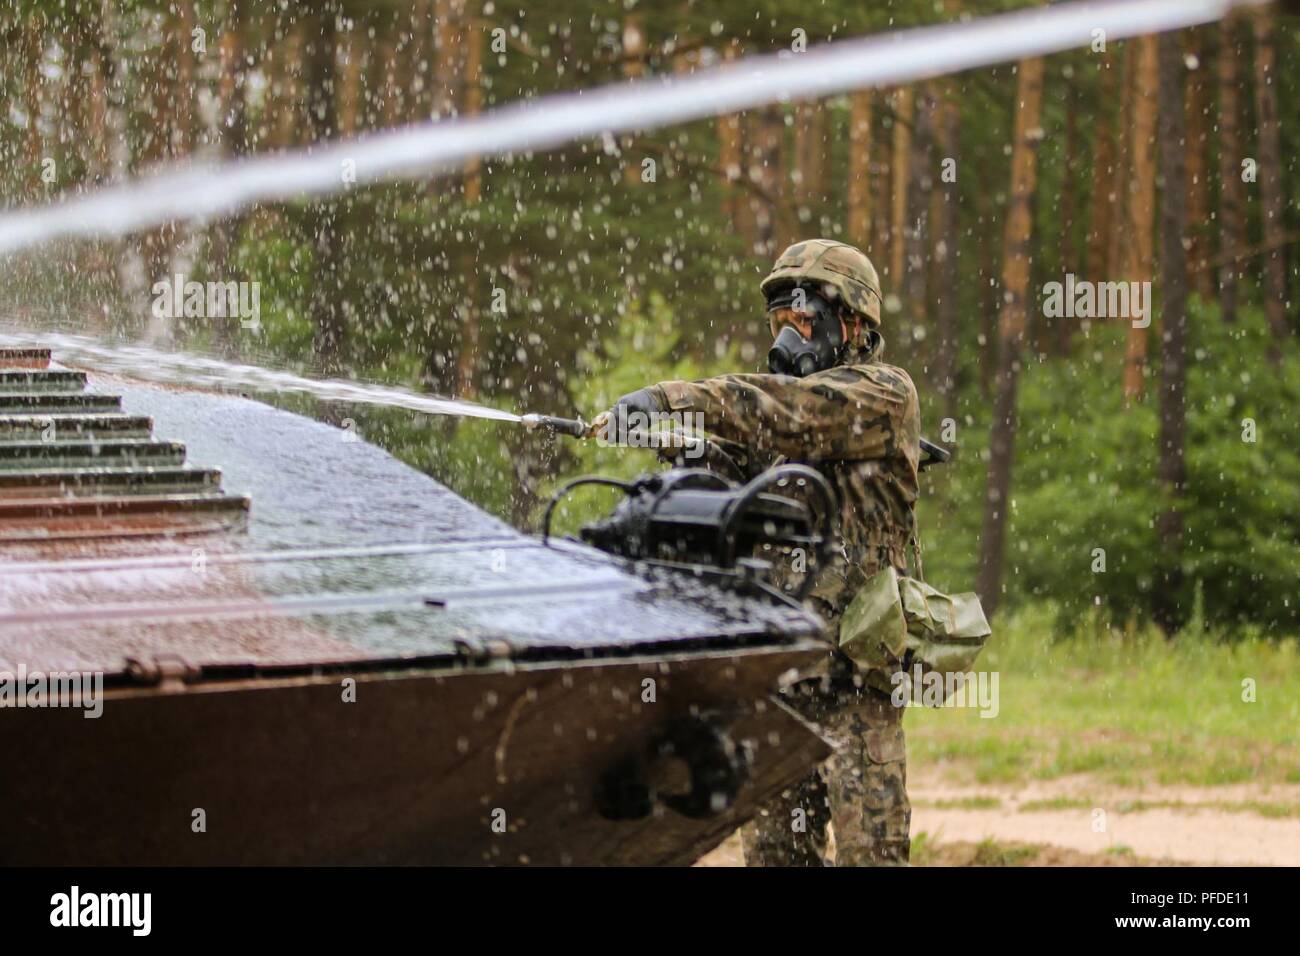 A Polish soldier with 15th Mechanized Brigade, simulates the decontamination of a BWP-1 Infantry Fighting Vehicle as part of Saber Strike 18 with Battle Group Poland at Bemowo Piskie Training Area, Poland on June 5, 2018. Saber Strike is a multinational exercise currently in its eighth year. This year's exercise, which runs from June 3-15, tests allies and partners from 19 countries on their ability work together to deter aggression in the region and improve each unit's ability to perform their designated mission. Stock Photo